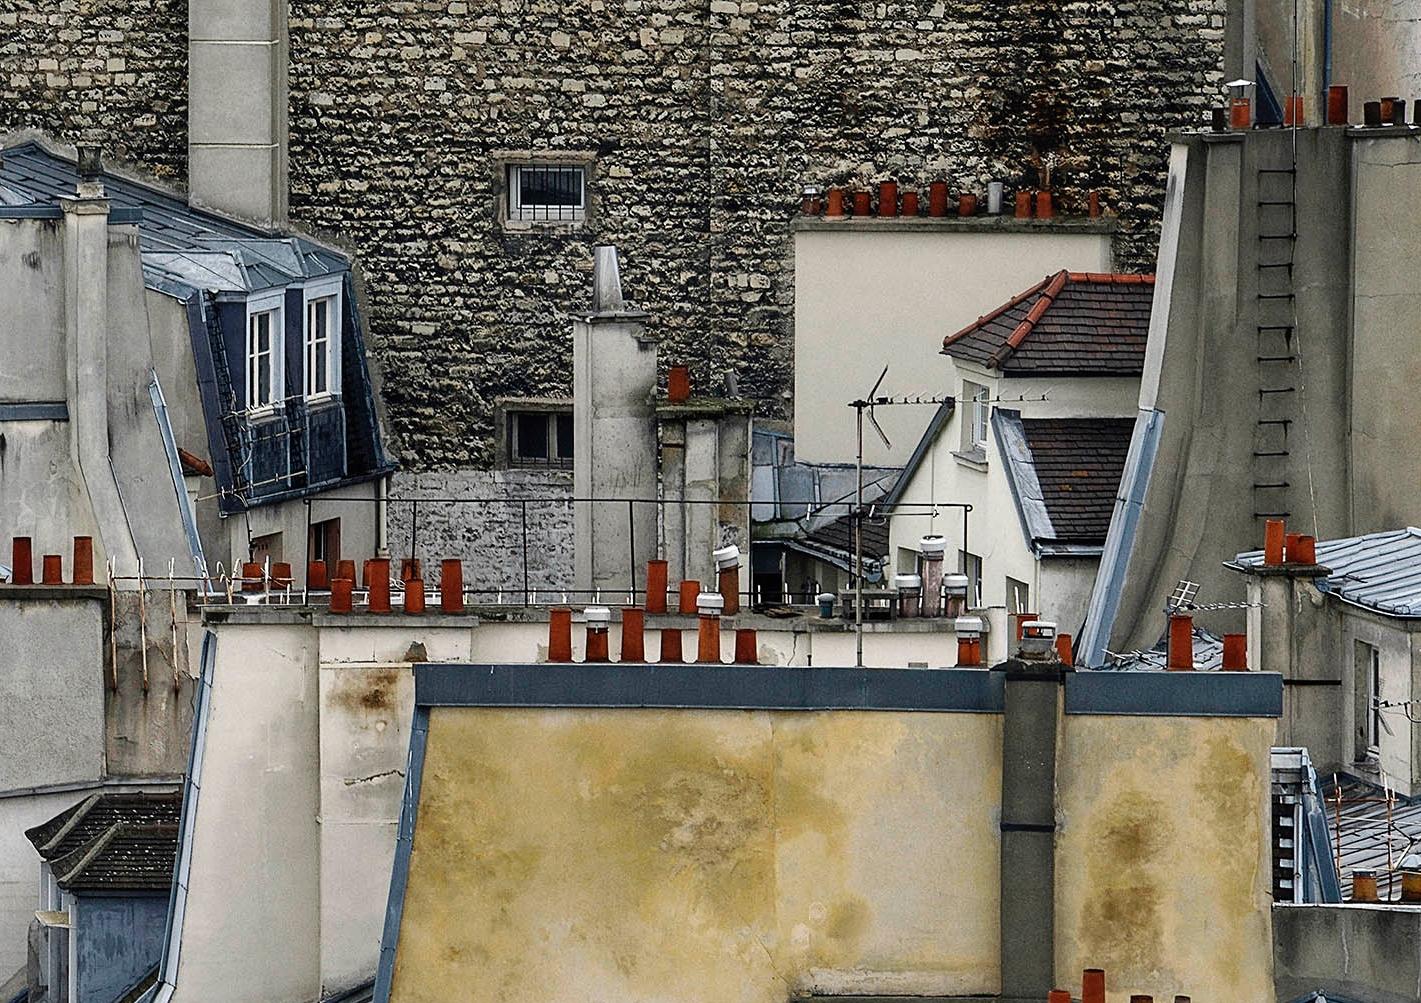 Michael WOLF (1954 – 2019, Germany)
Paris Rooftops 01, 2014
C–print
Sheet 121,9 x 172,7 cm (48 x 68 in.) 
Edition of 9, plus 2 AP; Ed. no. 8/9

Michael Wolf was born in 1954 in Munich, Germany. He worked and lived in Paris and Hong Kong where he